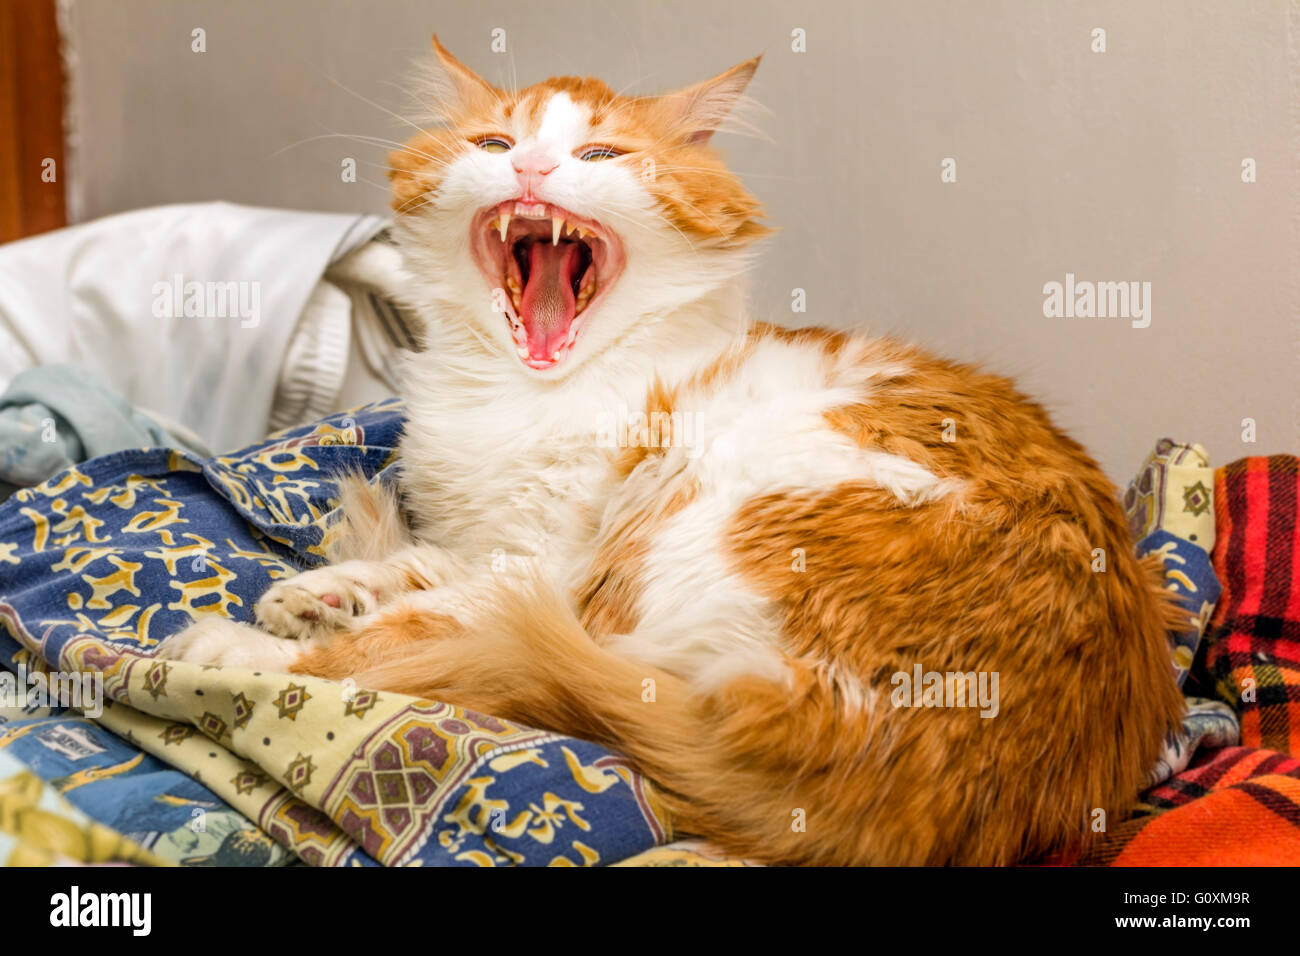 Big beauty red cat yawns in room Stock Photo